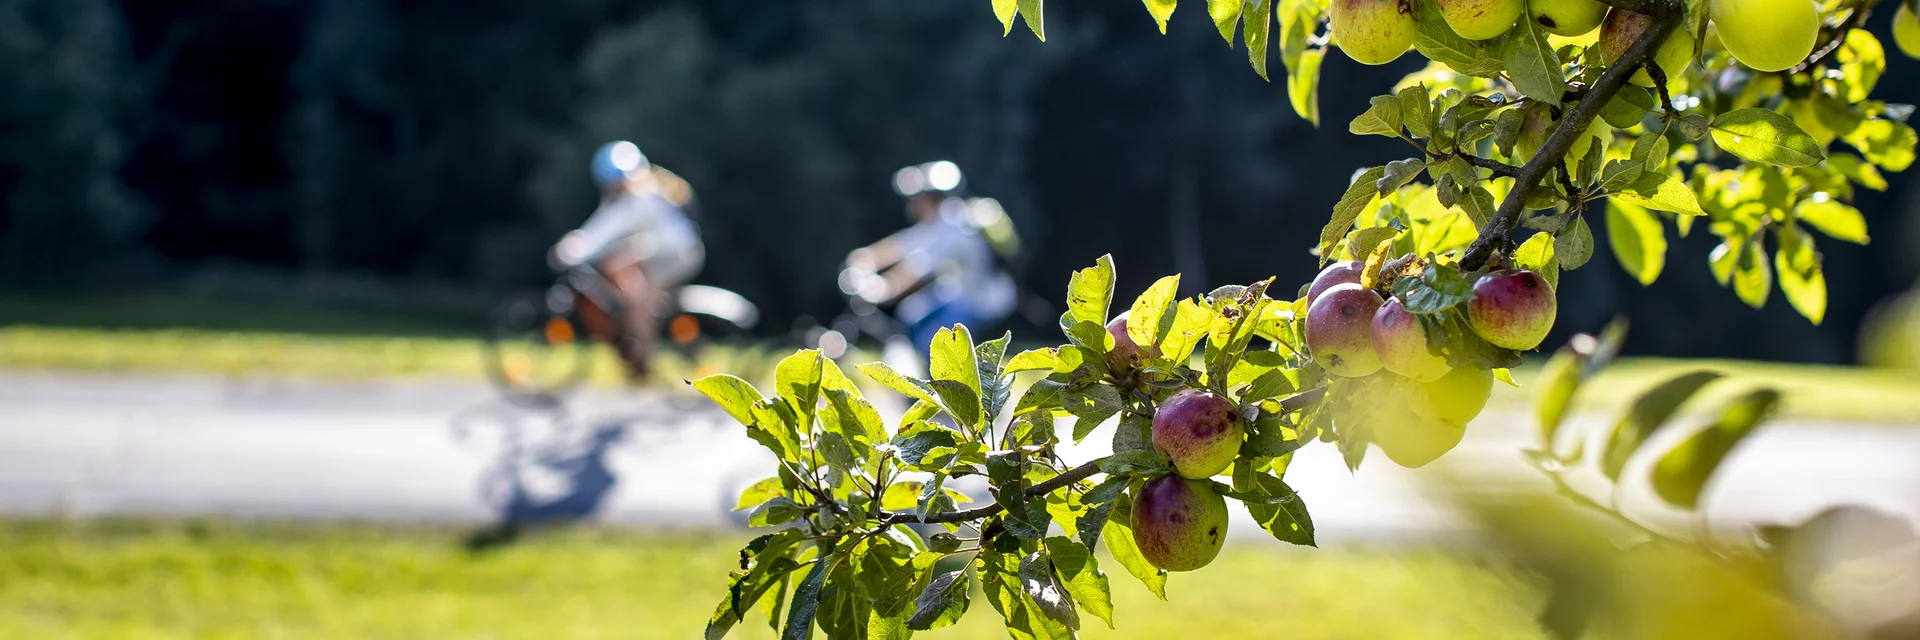 Cycling along orchards | © Steiermark Tourismus | Tom Lamm